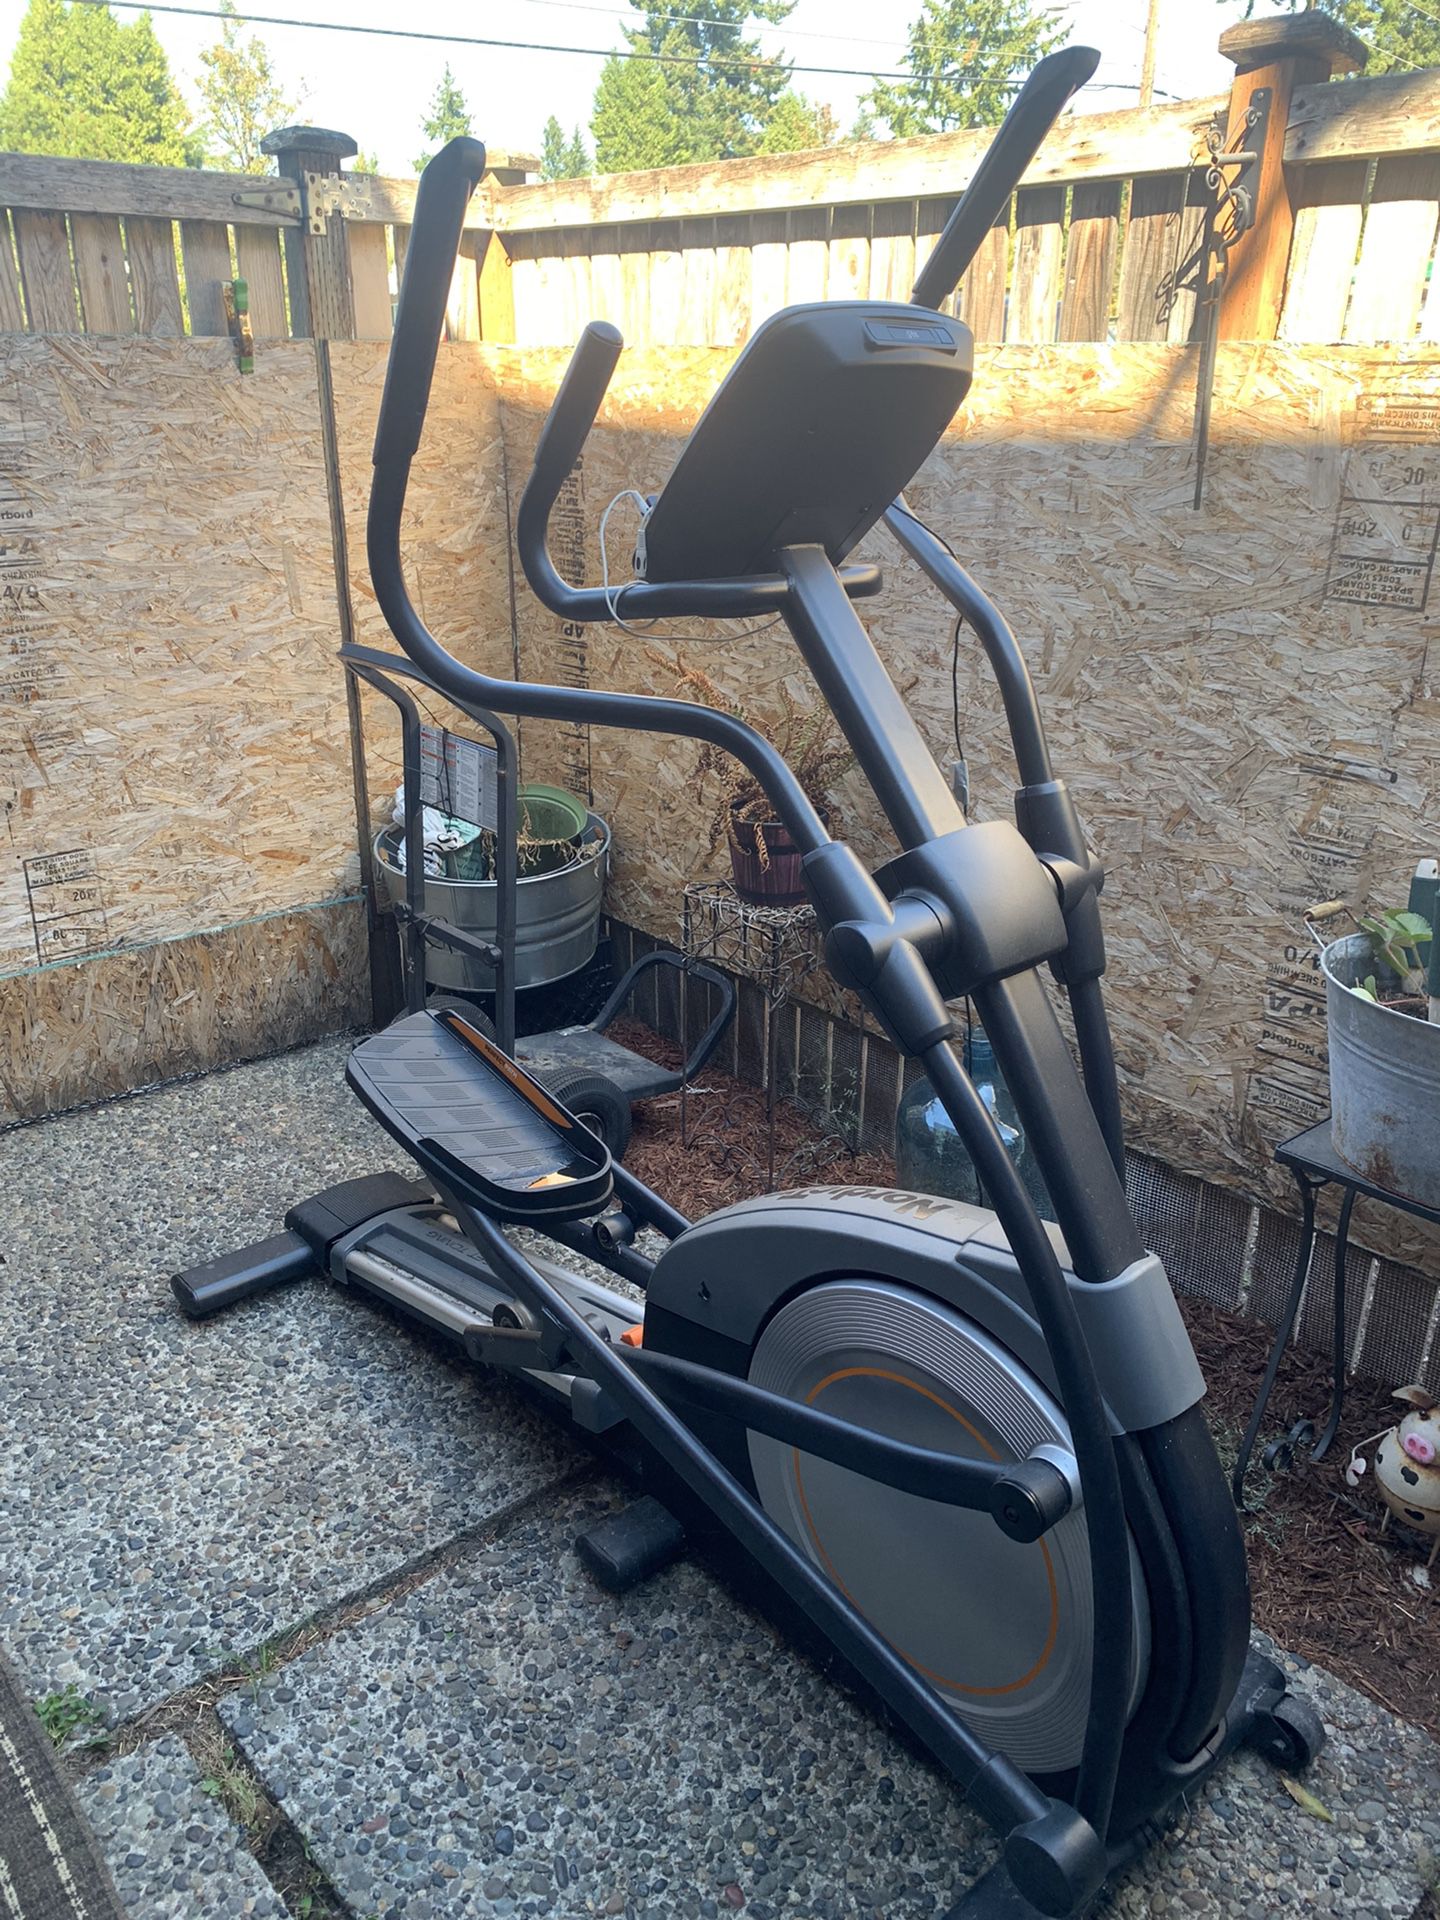 NordicTrack E 6.7 Elliptical - Target and Tone as you Train